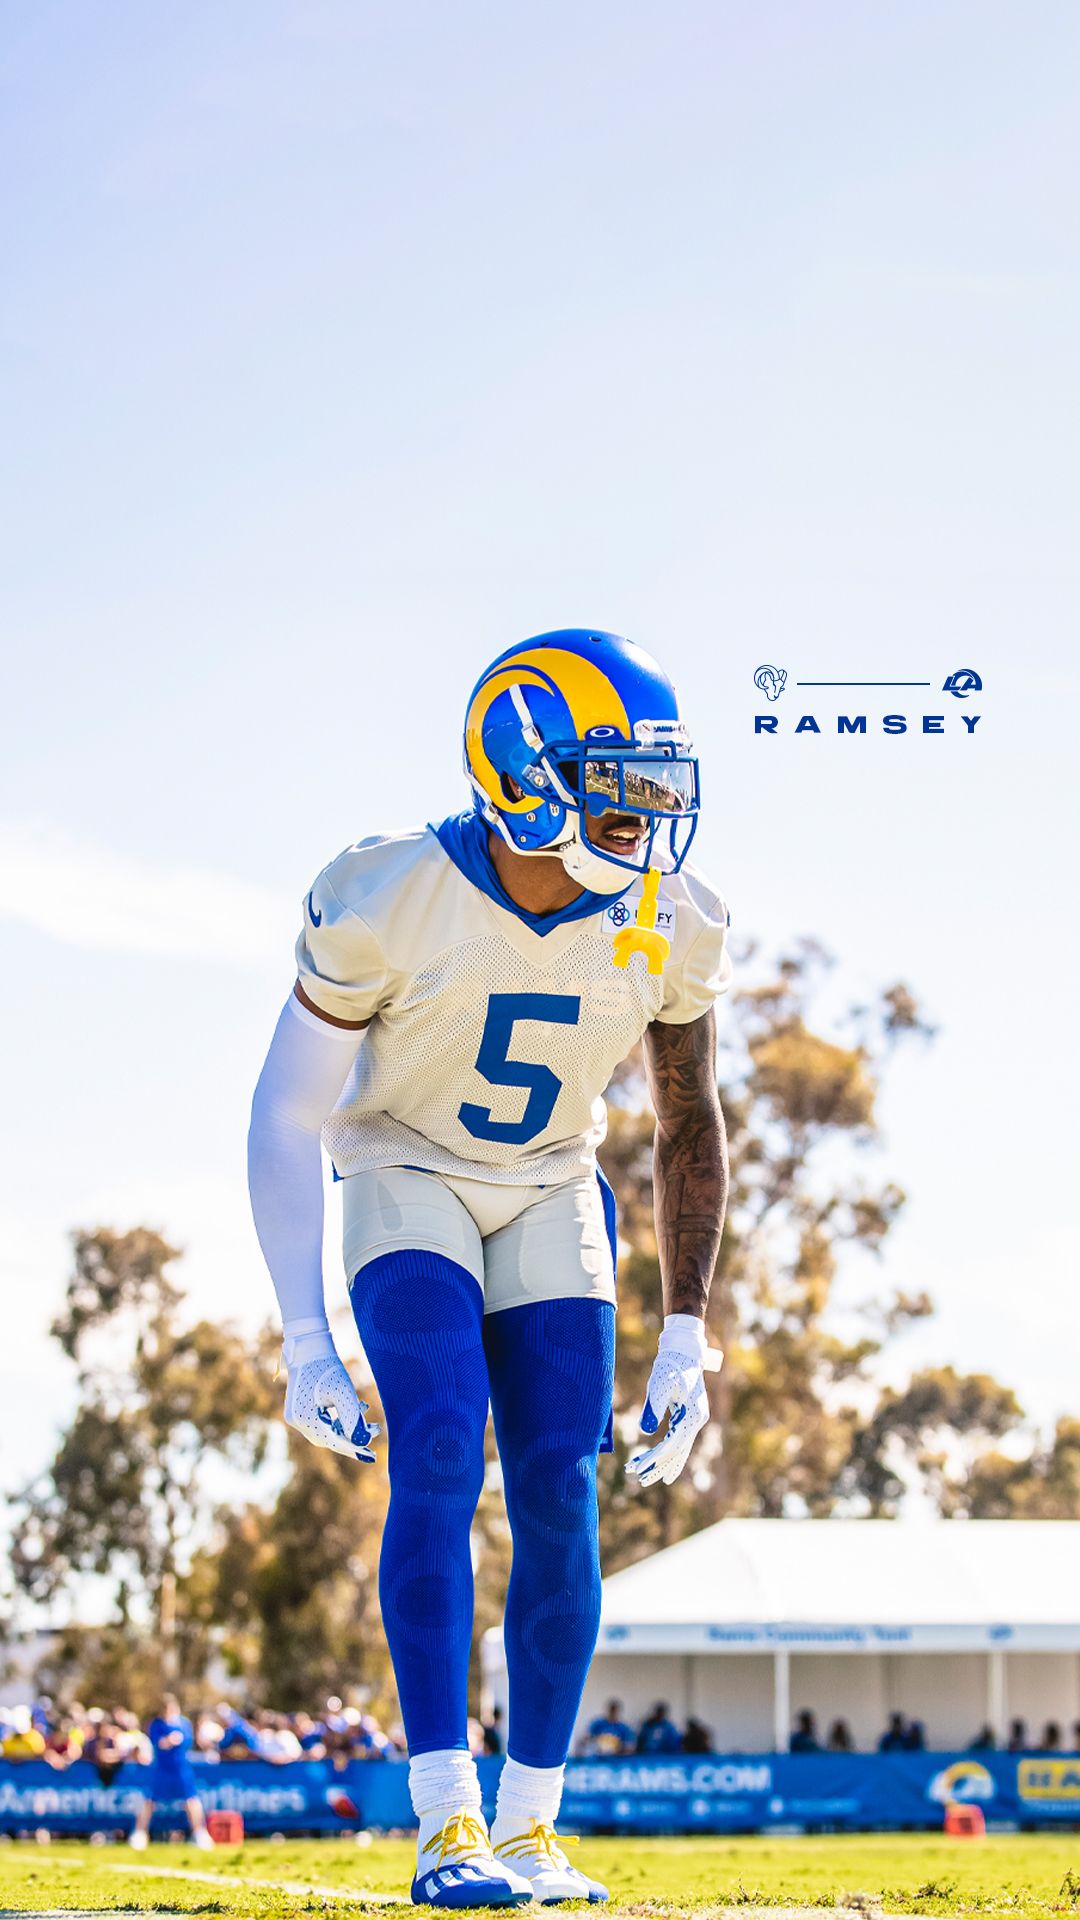 los angeles rams wallpaper,Quality assurance,protein